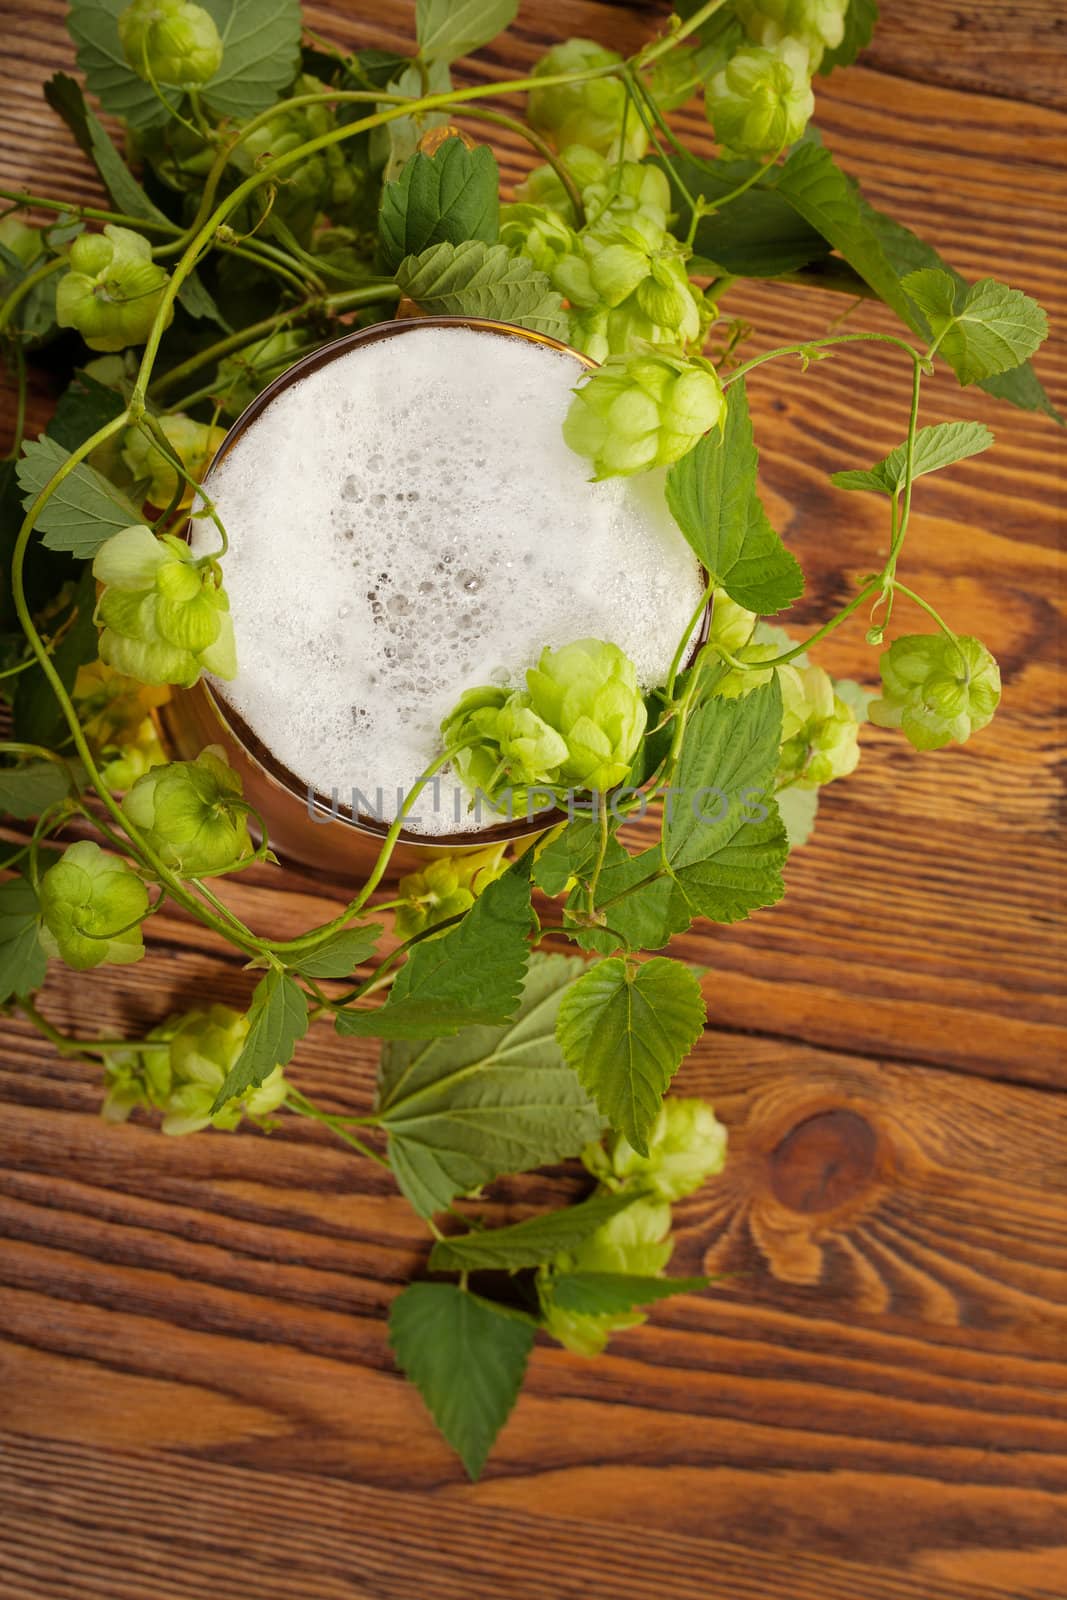 Pint and hop plant by igor_stramyk